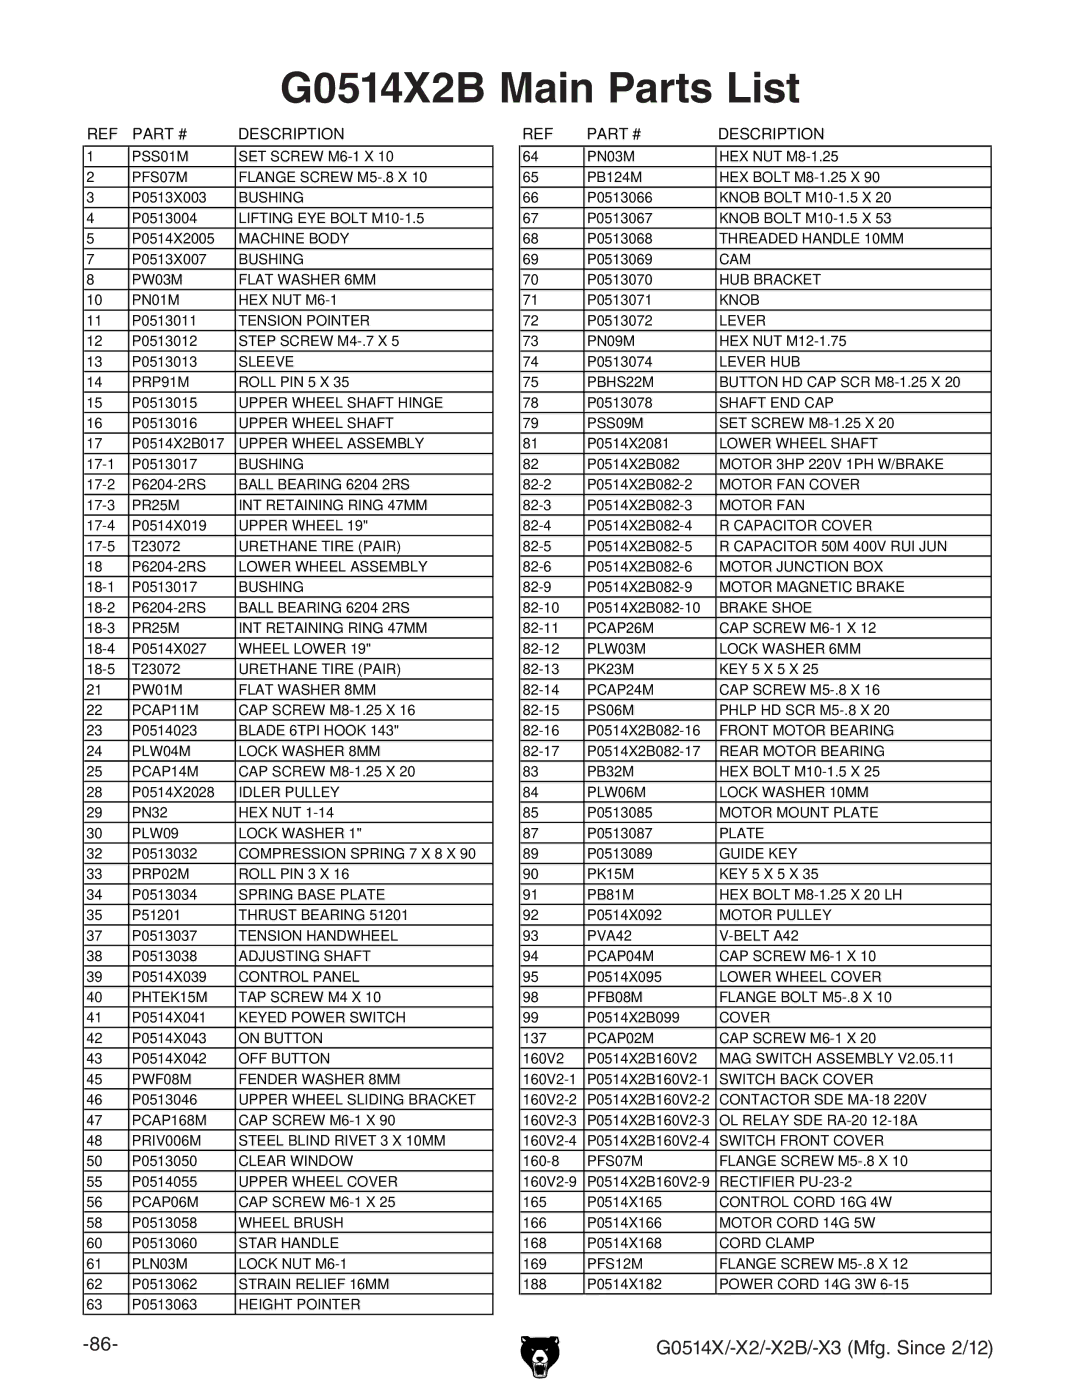 Grizzly owner manual G0514X2B Main Parts List 